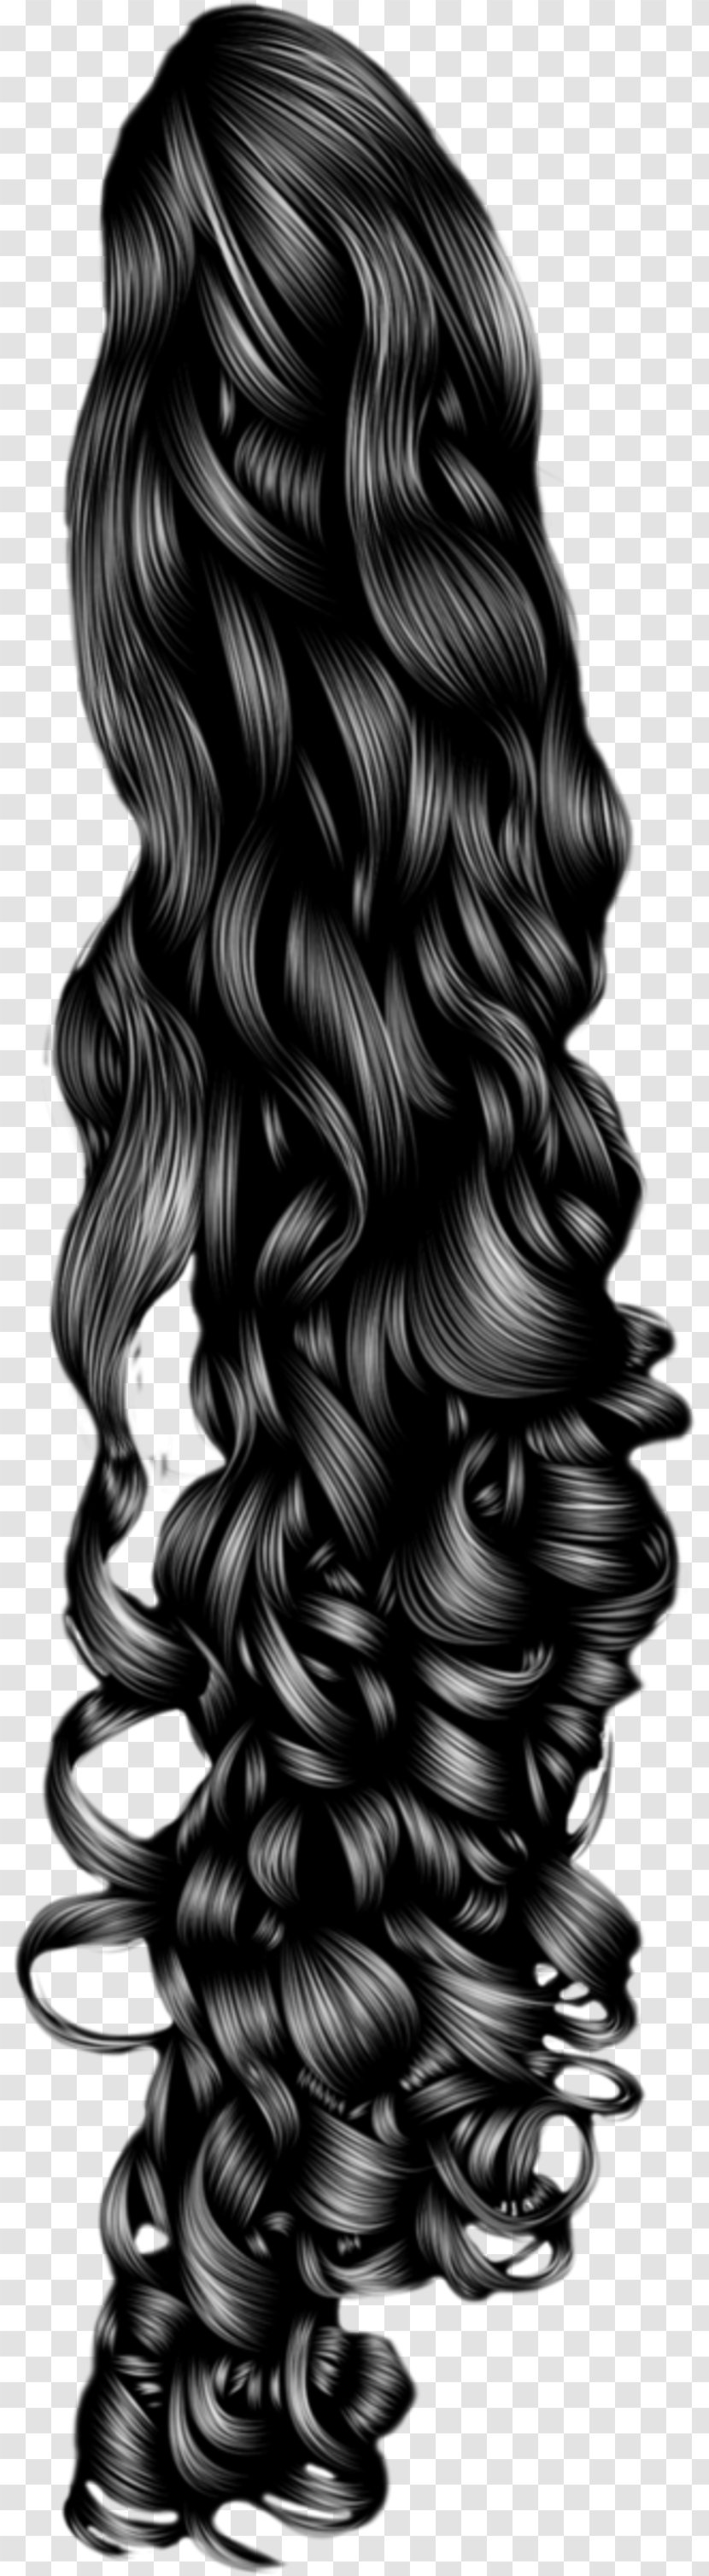 Black Hair Wig Hairstyle - And White Transparent PNG